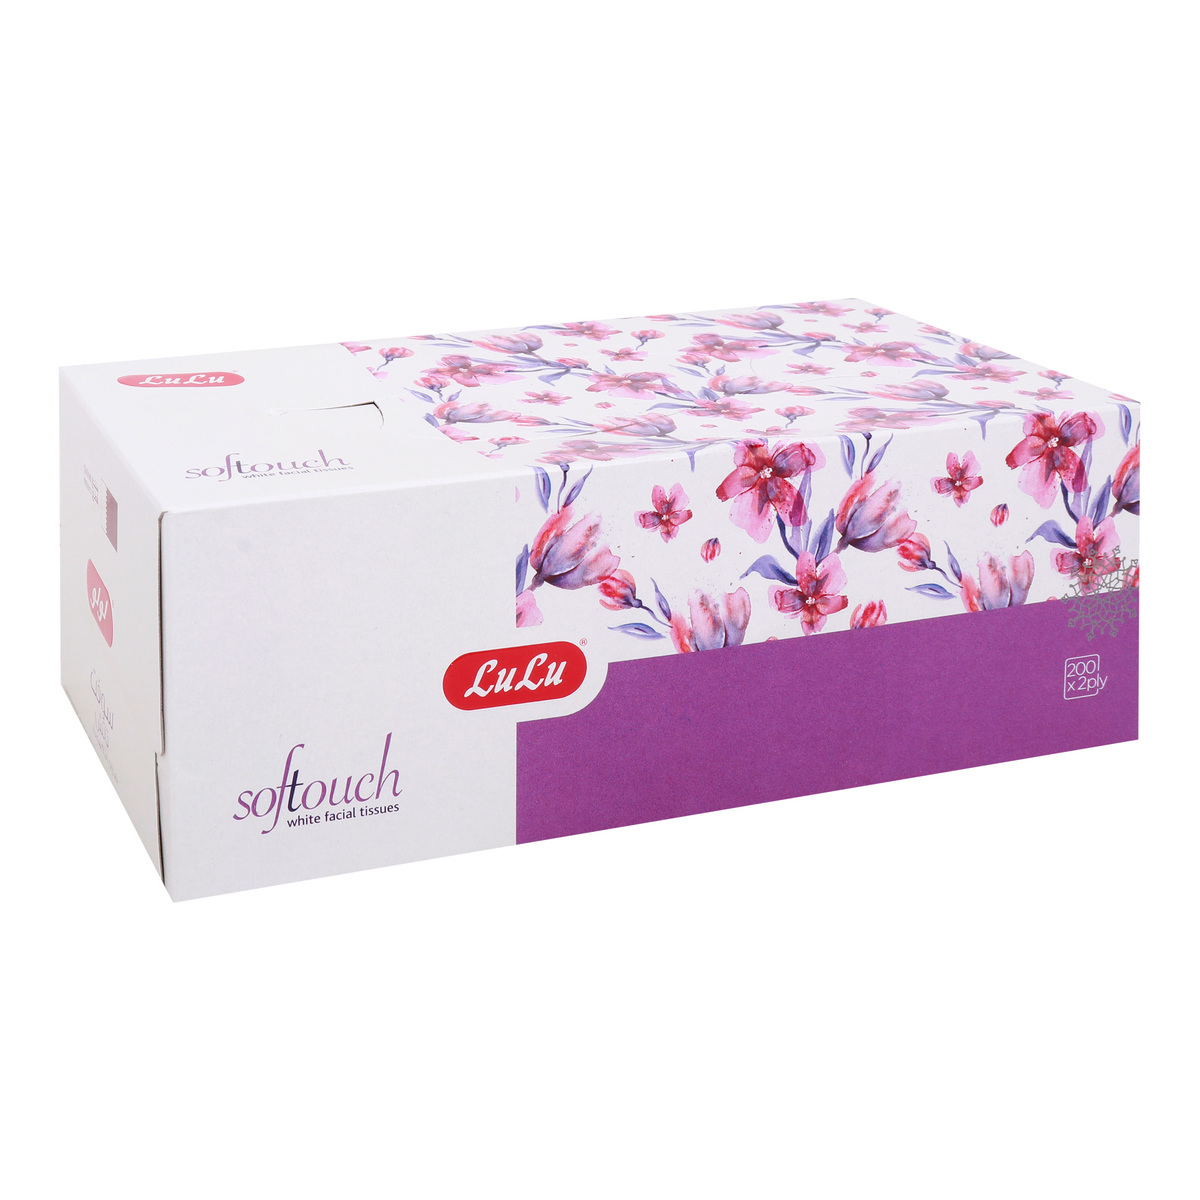 Lulu Softouch White Facial Tissue Pink 200'S 2 Ply x 5 Pieces